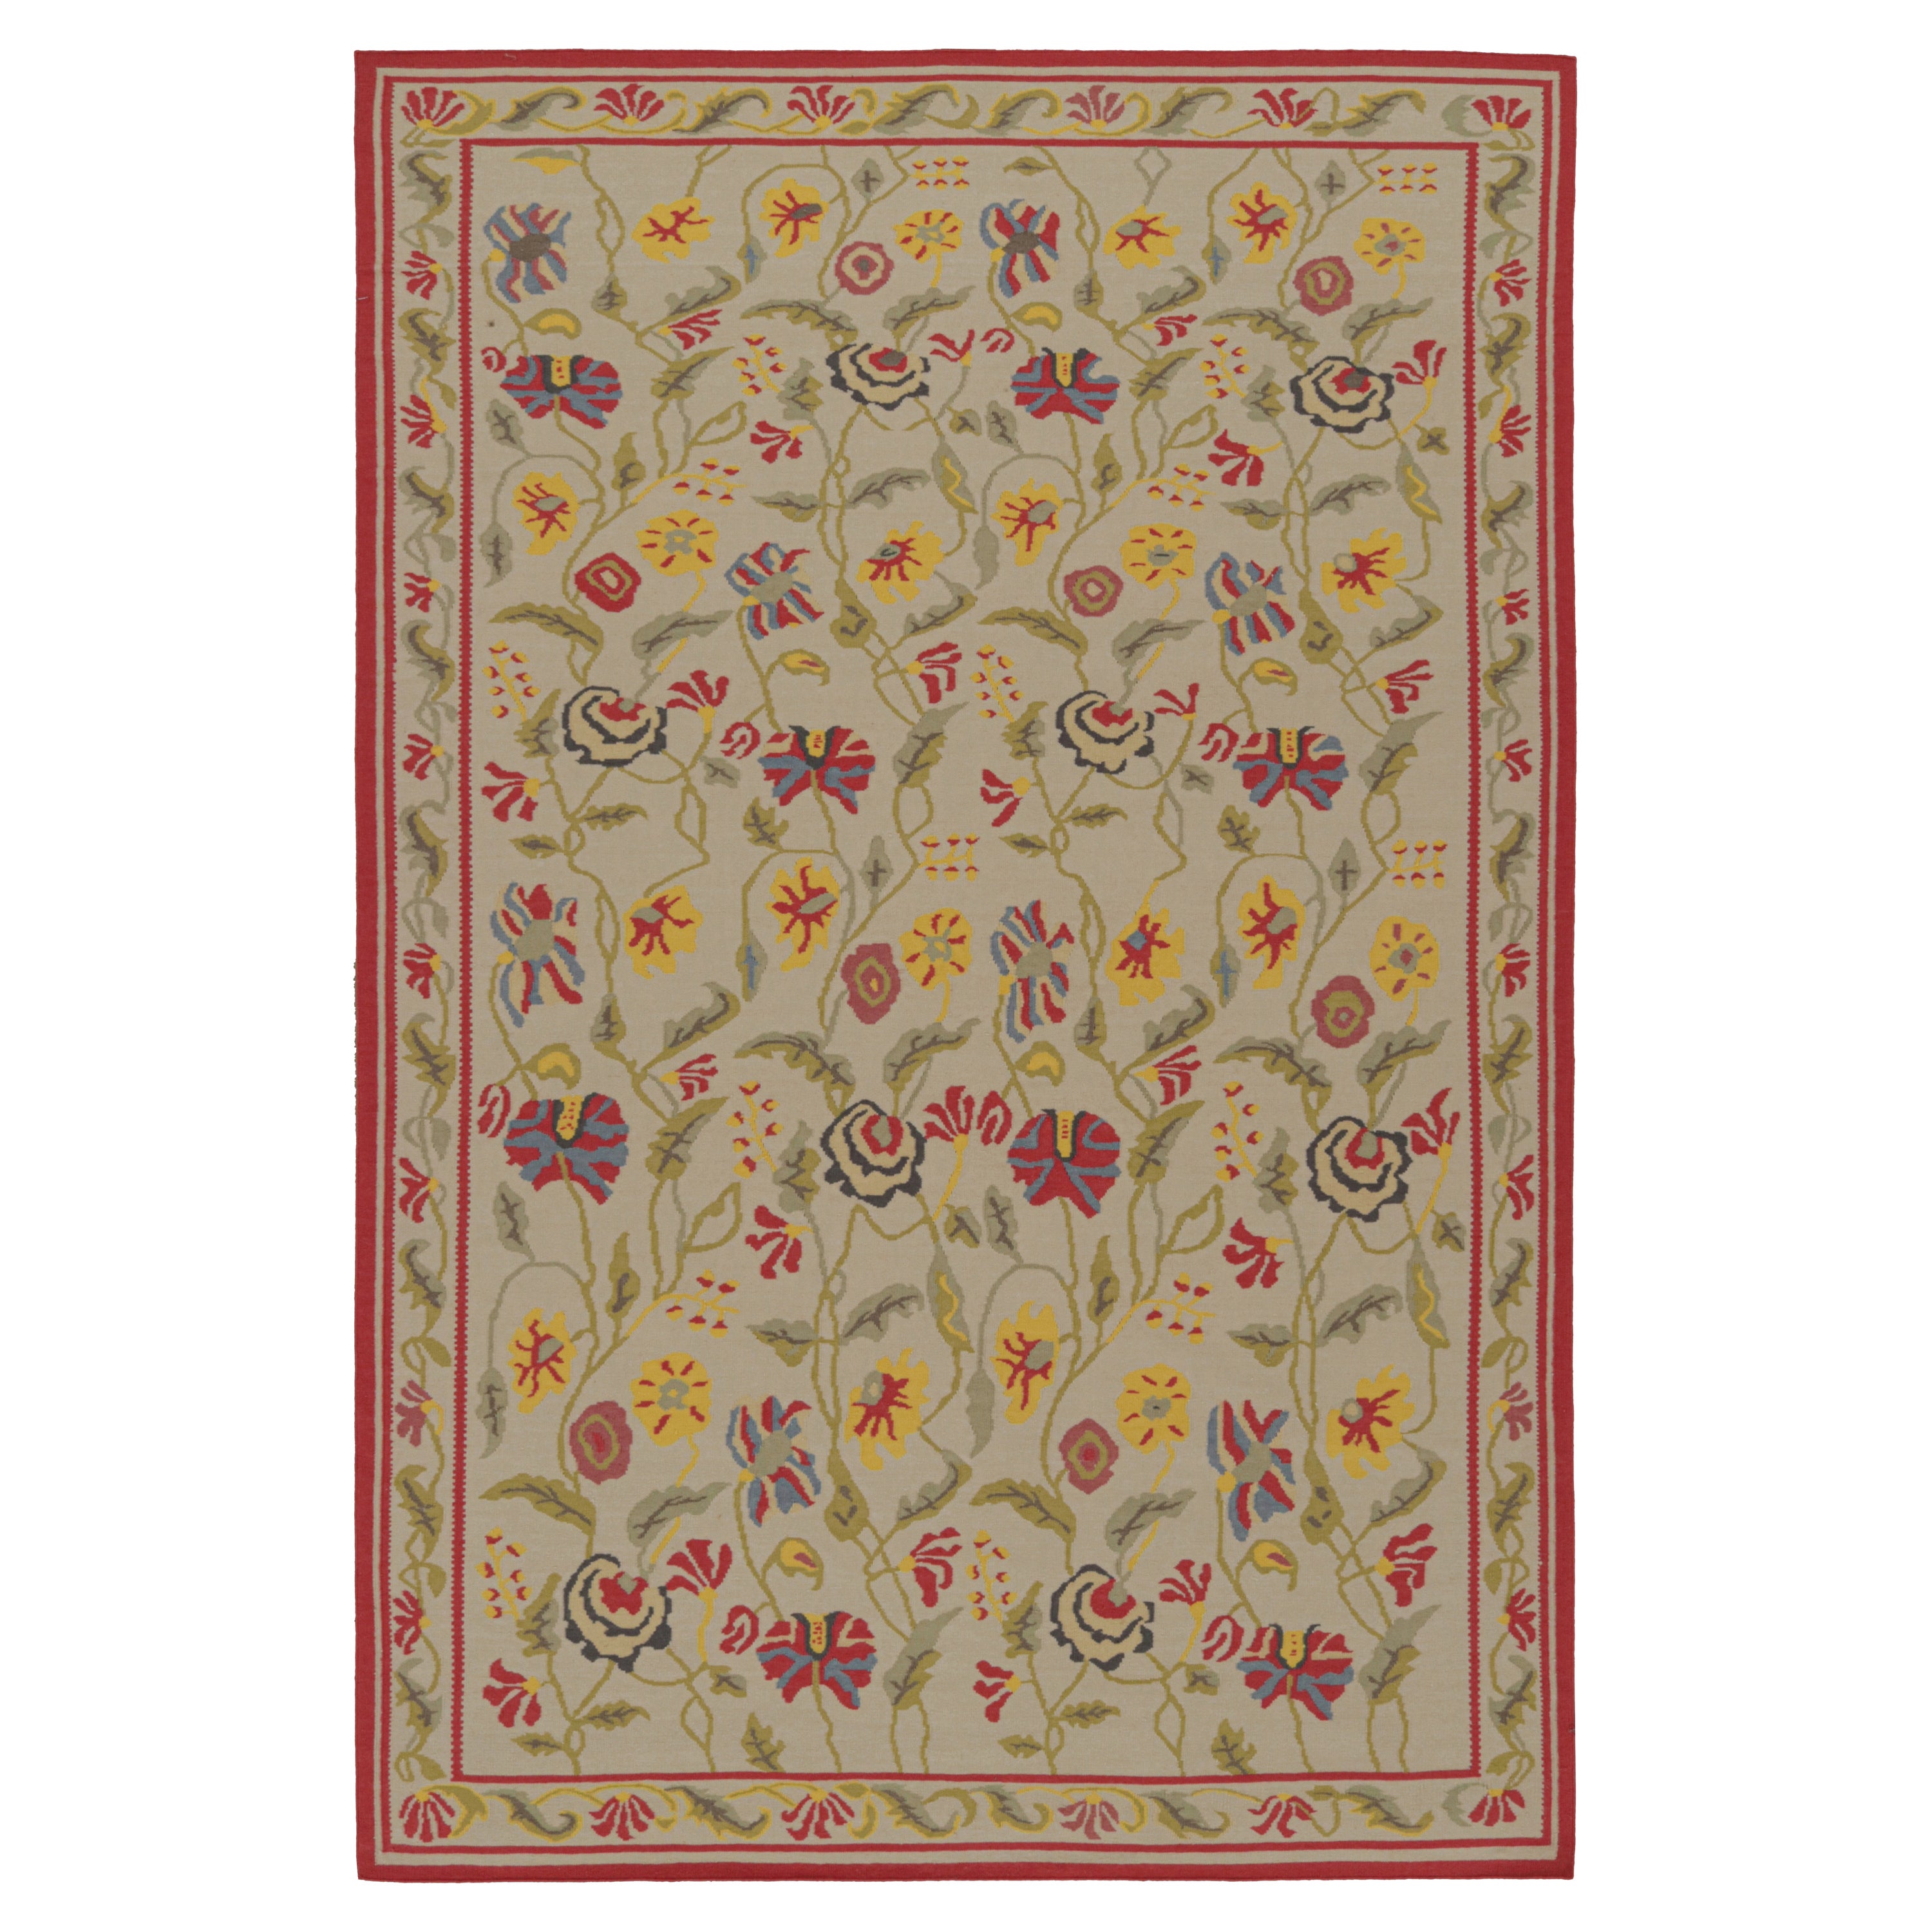 Rug & Kilim’s Contemporary Kilim Rug in Beige with Green and Red Floral Patterns